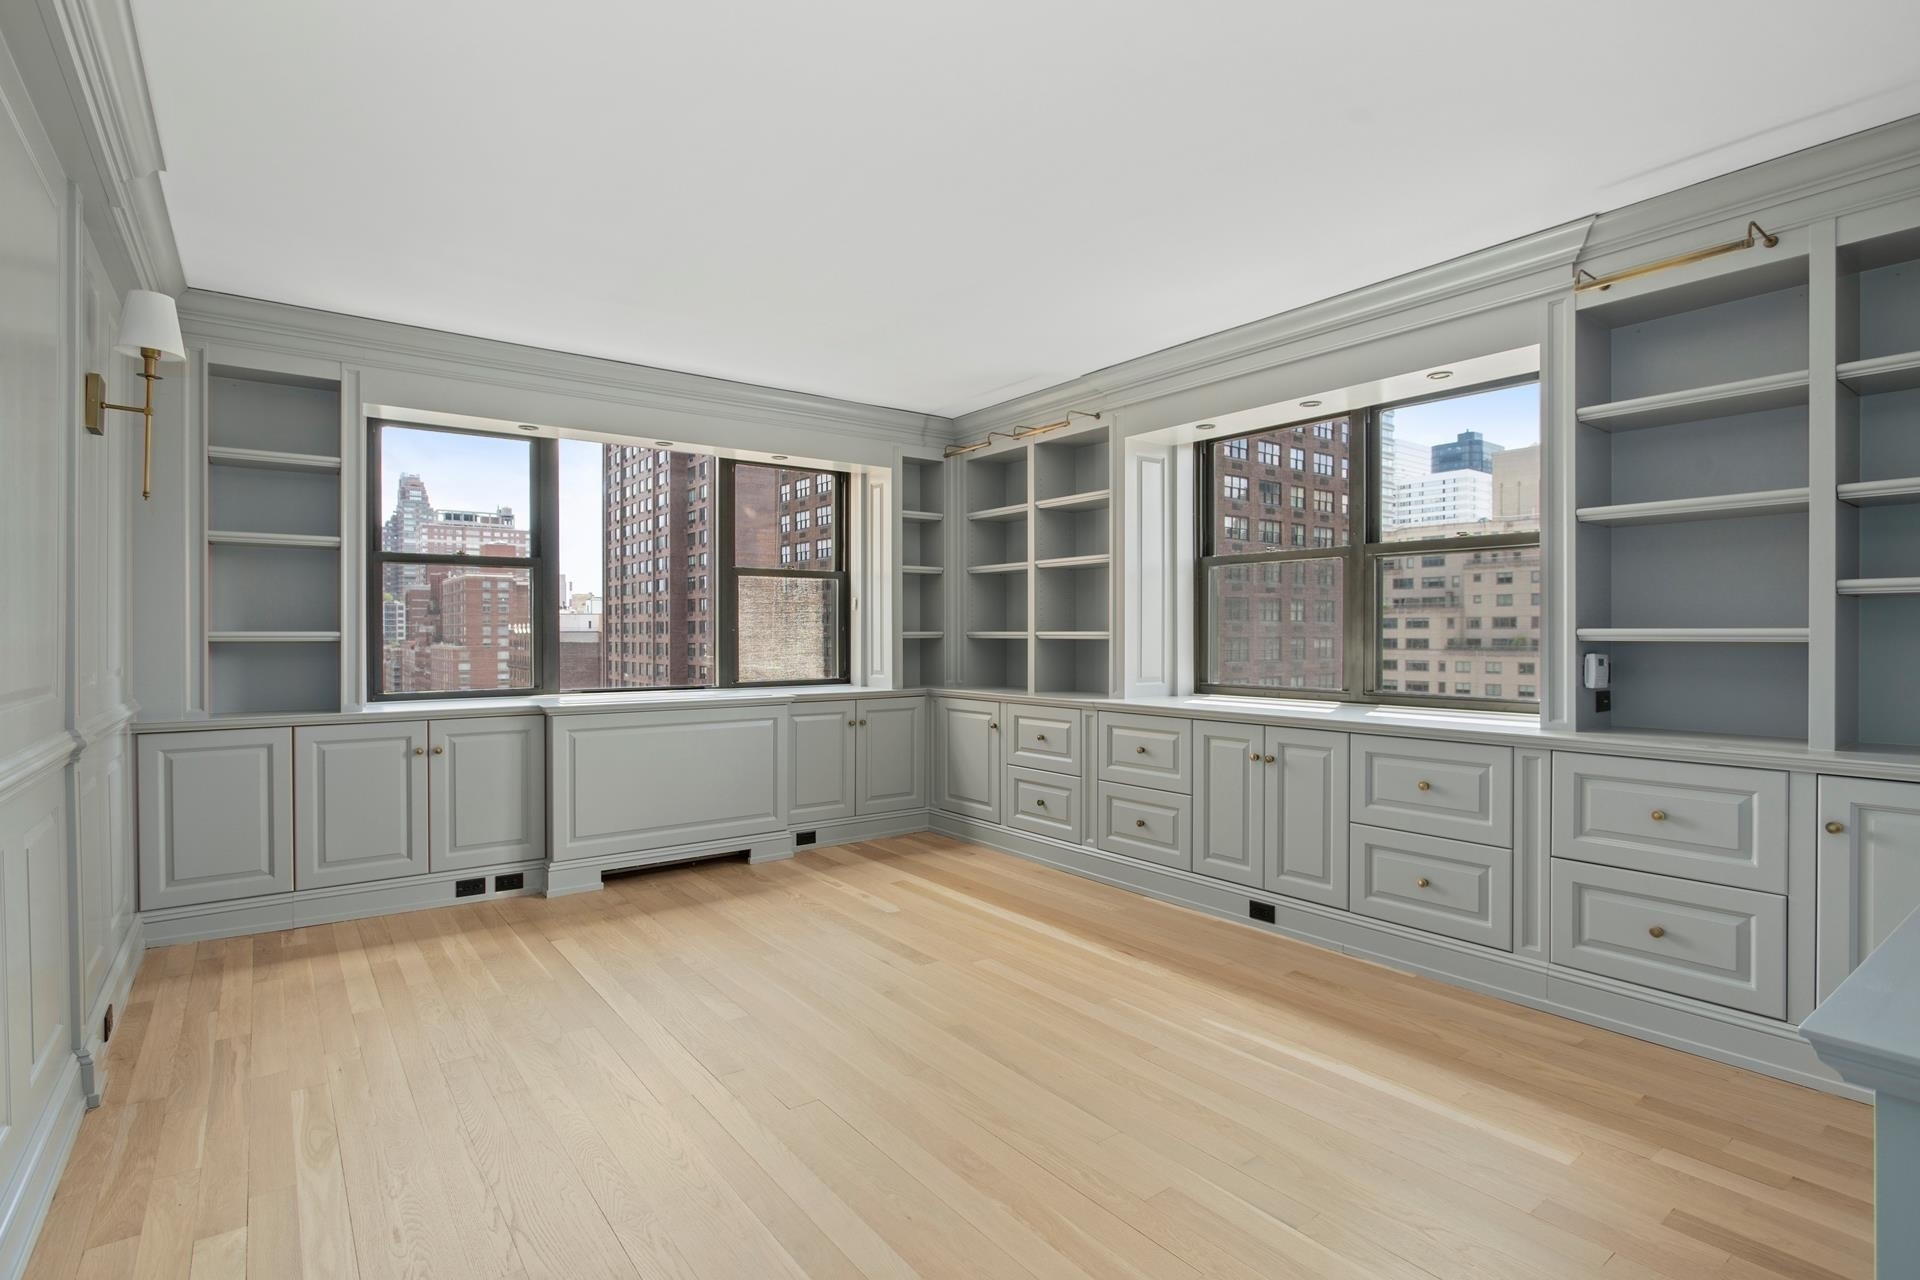 12. Co-op Properties for Sale at 165 E 72ND ST, 17A Lenox Hill, New York, New York 10021